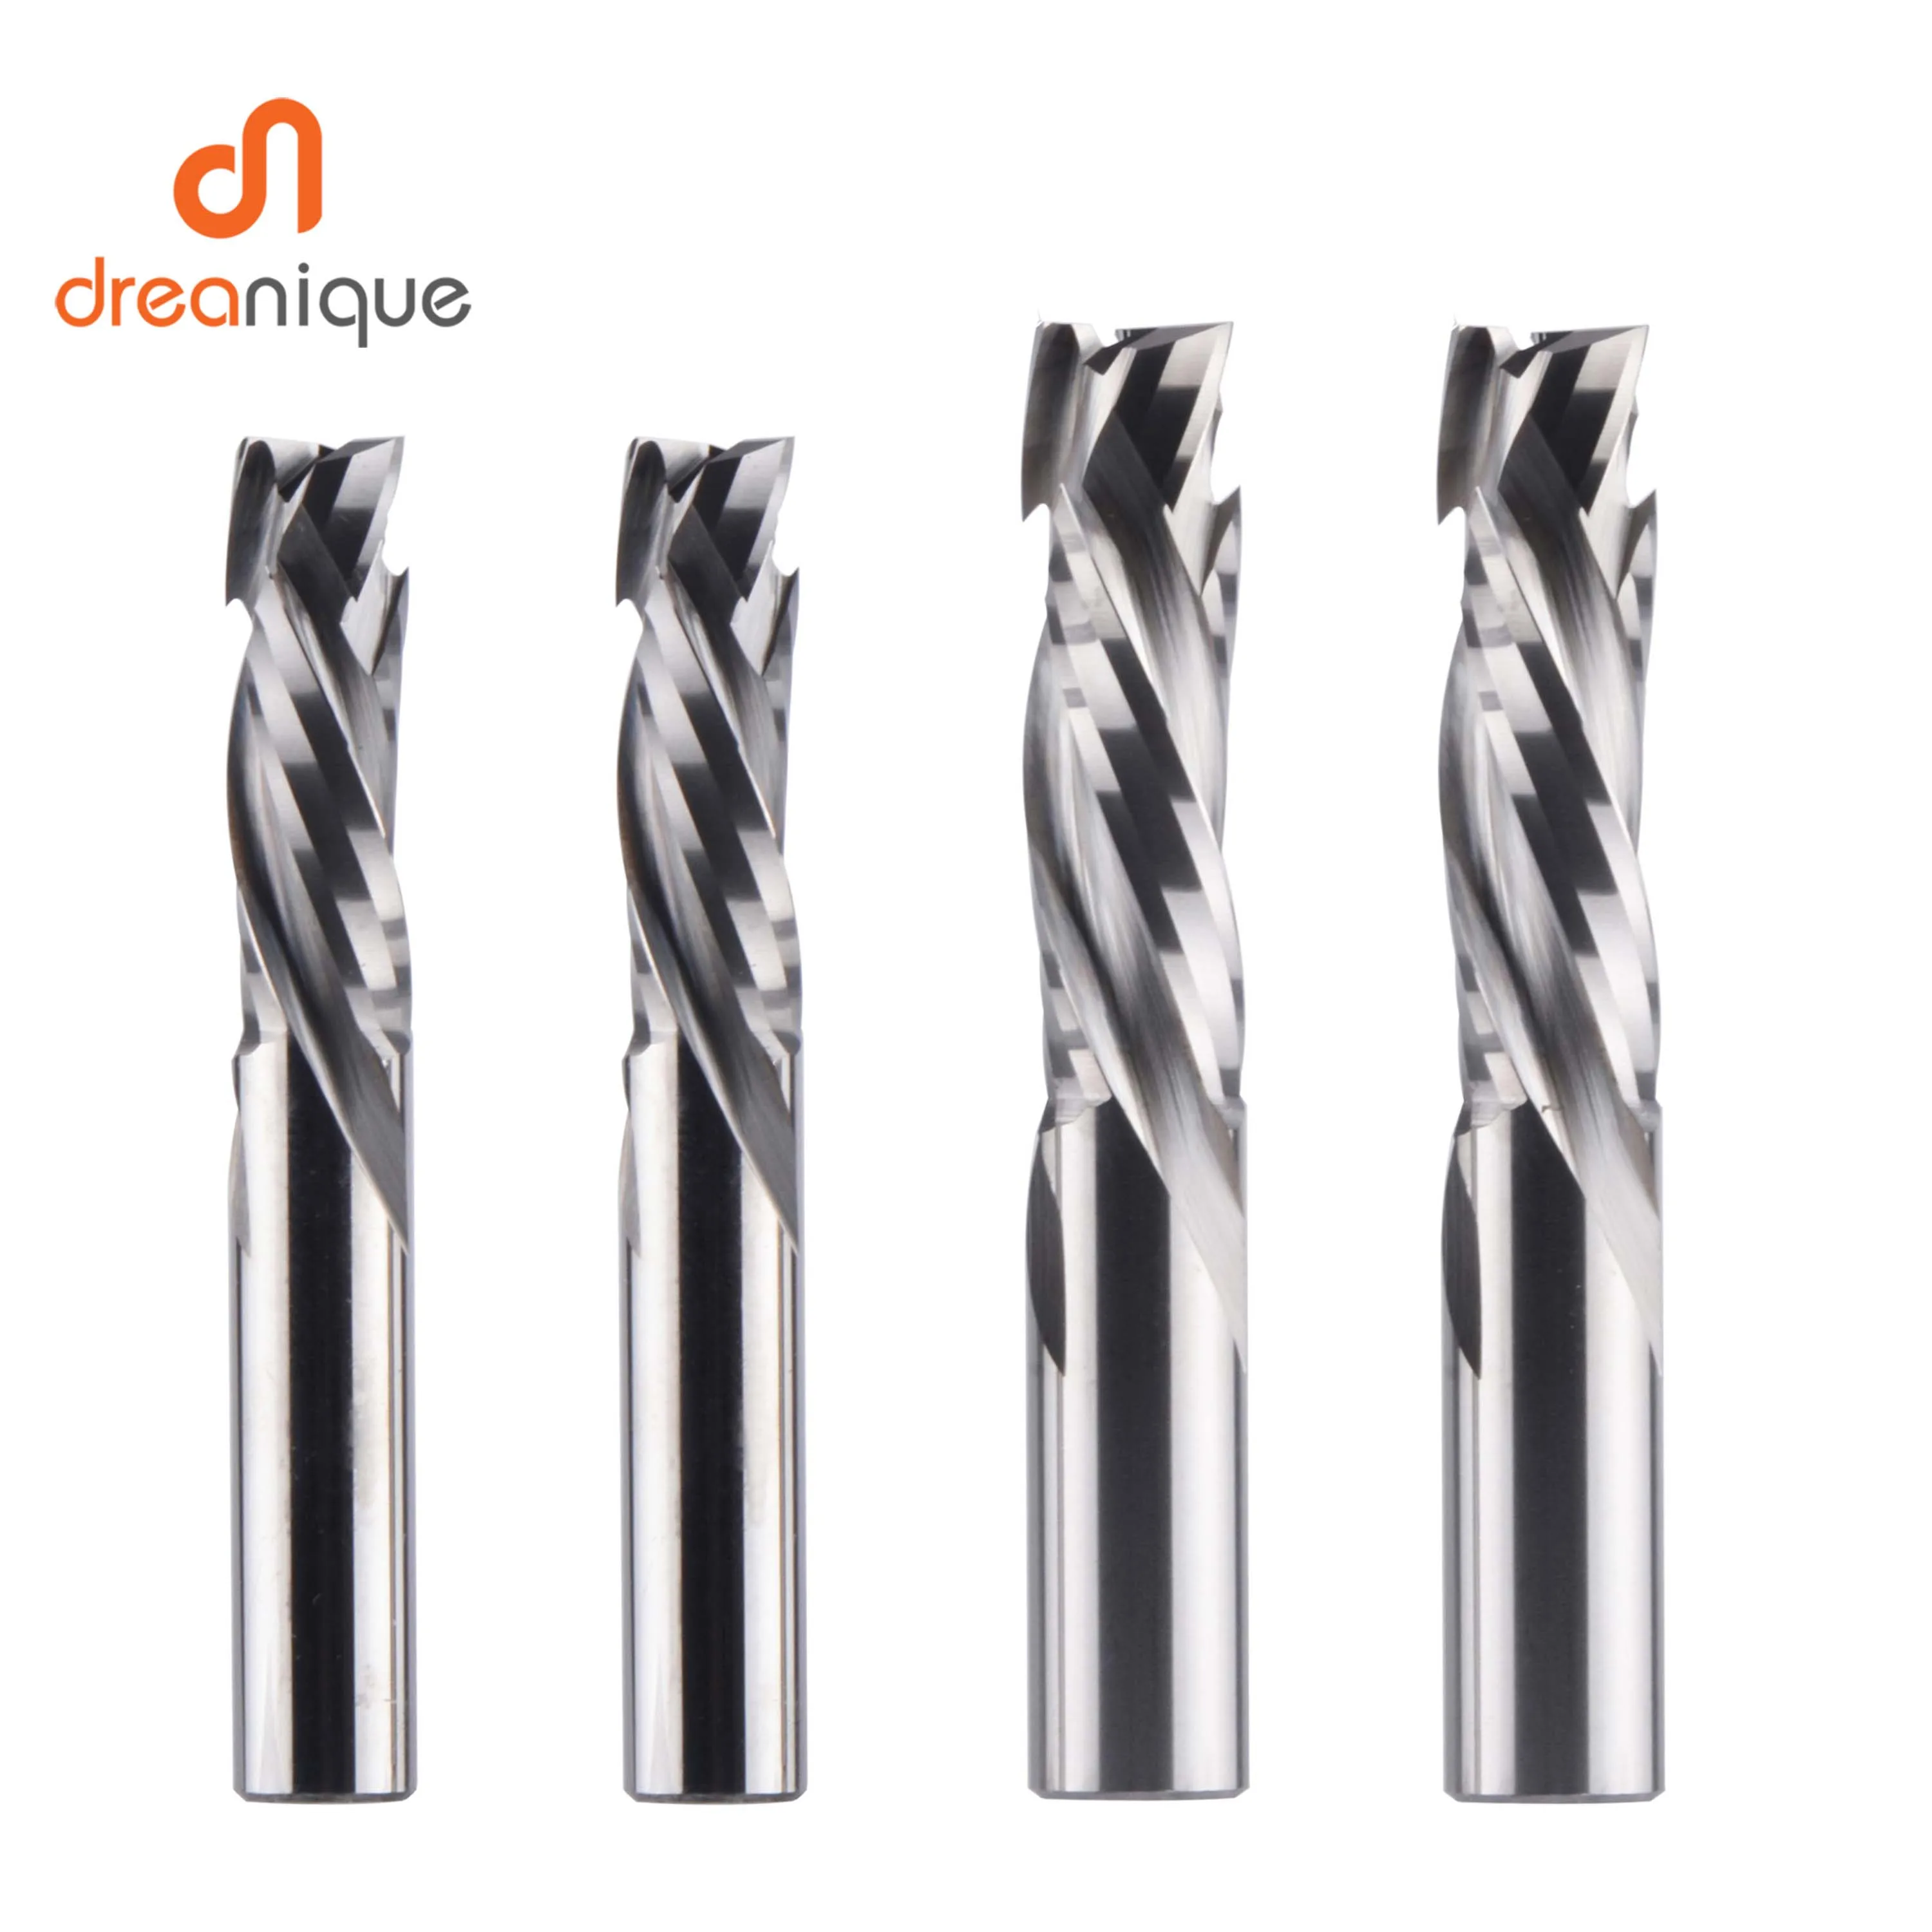 Dreanique Compression Milling Cutter Woodworking UP&DOWN Cut 3 Flutes Spiral CNC Tool Carbide End Mill Router Bits